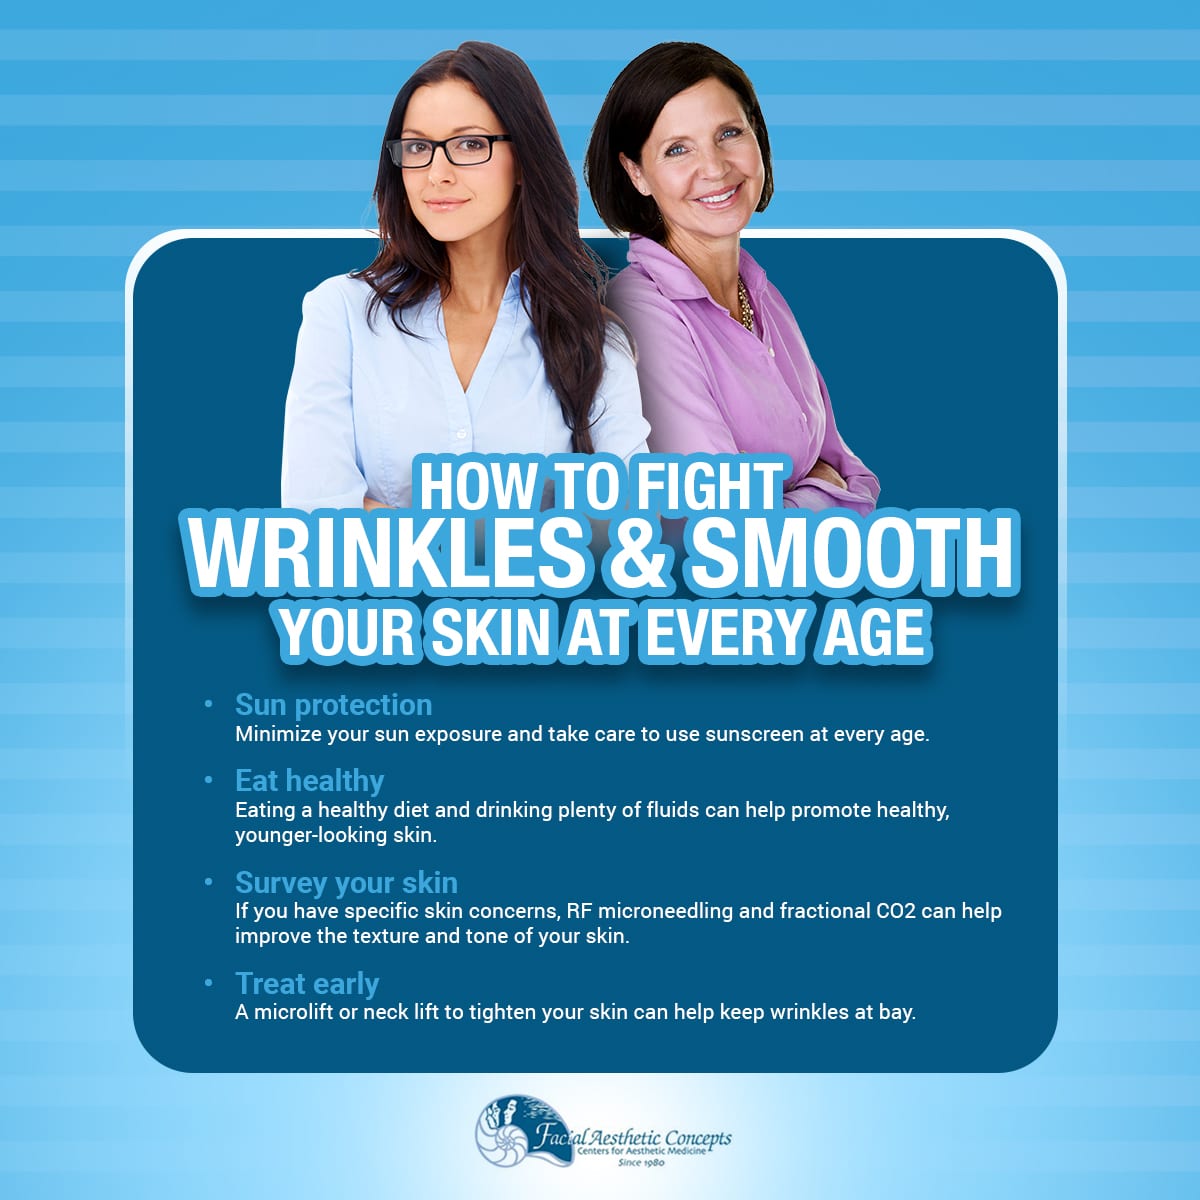 How To Fight Wrinkles & Smooth Your Skin At Every Age [Infographic] img 1